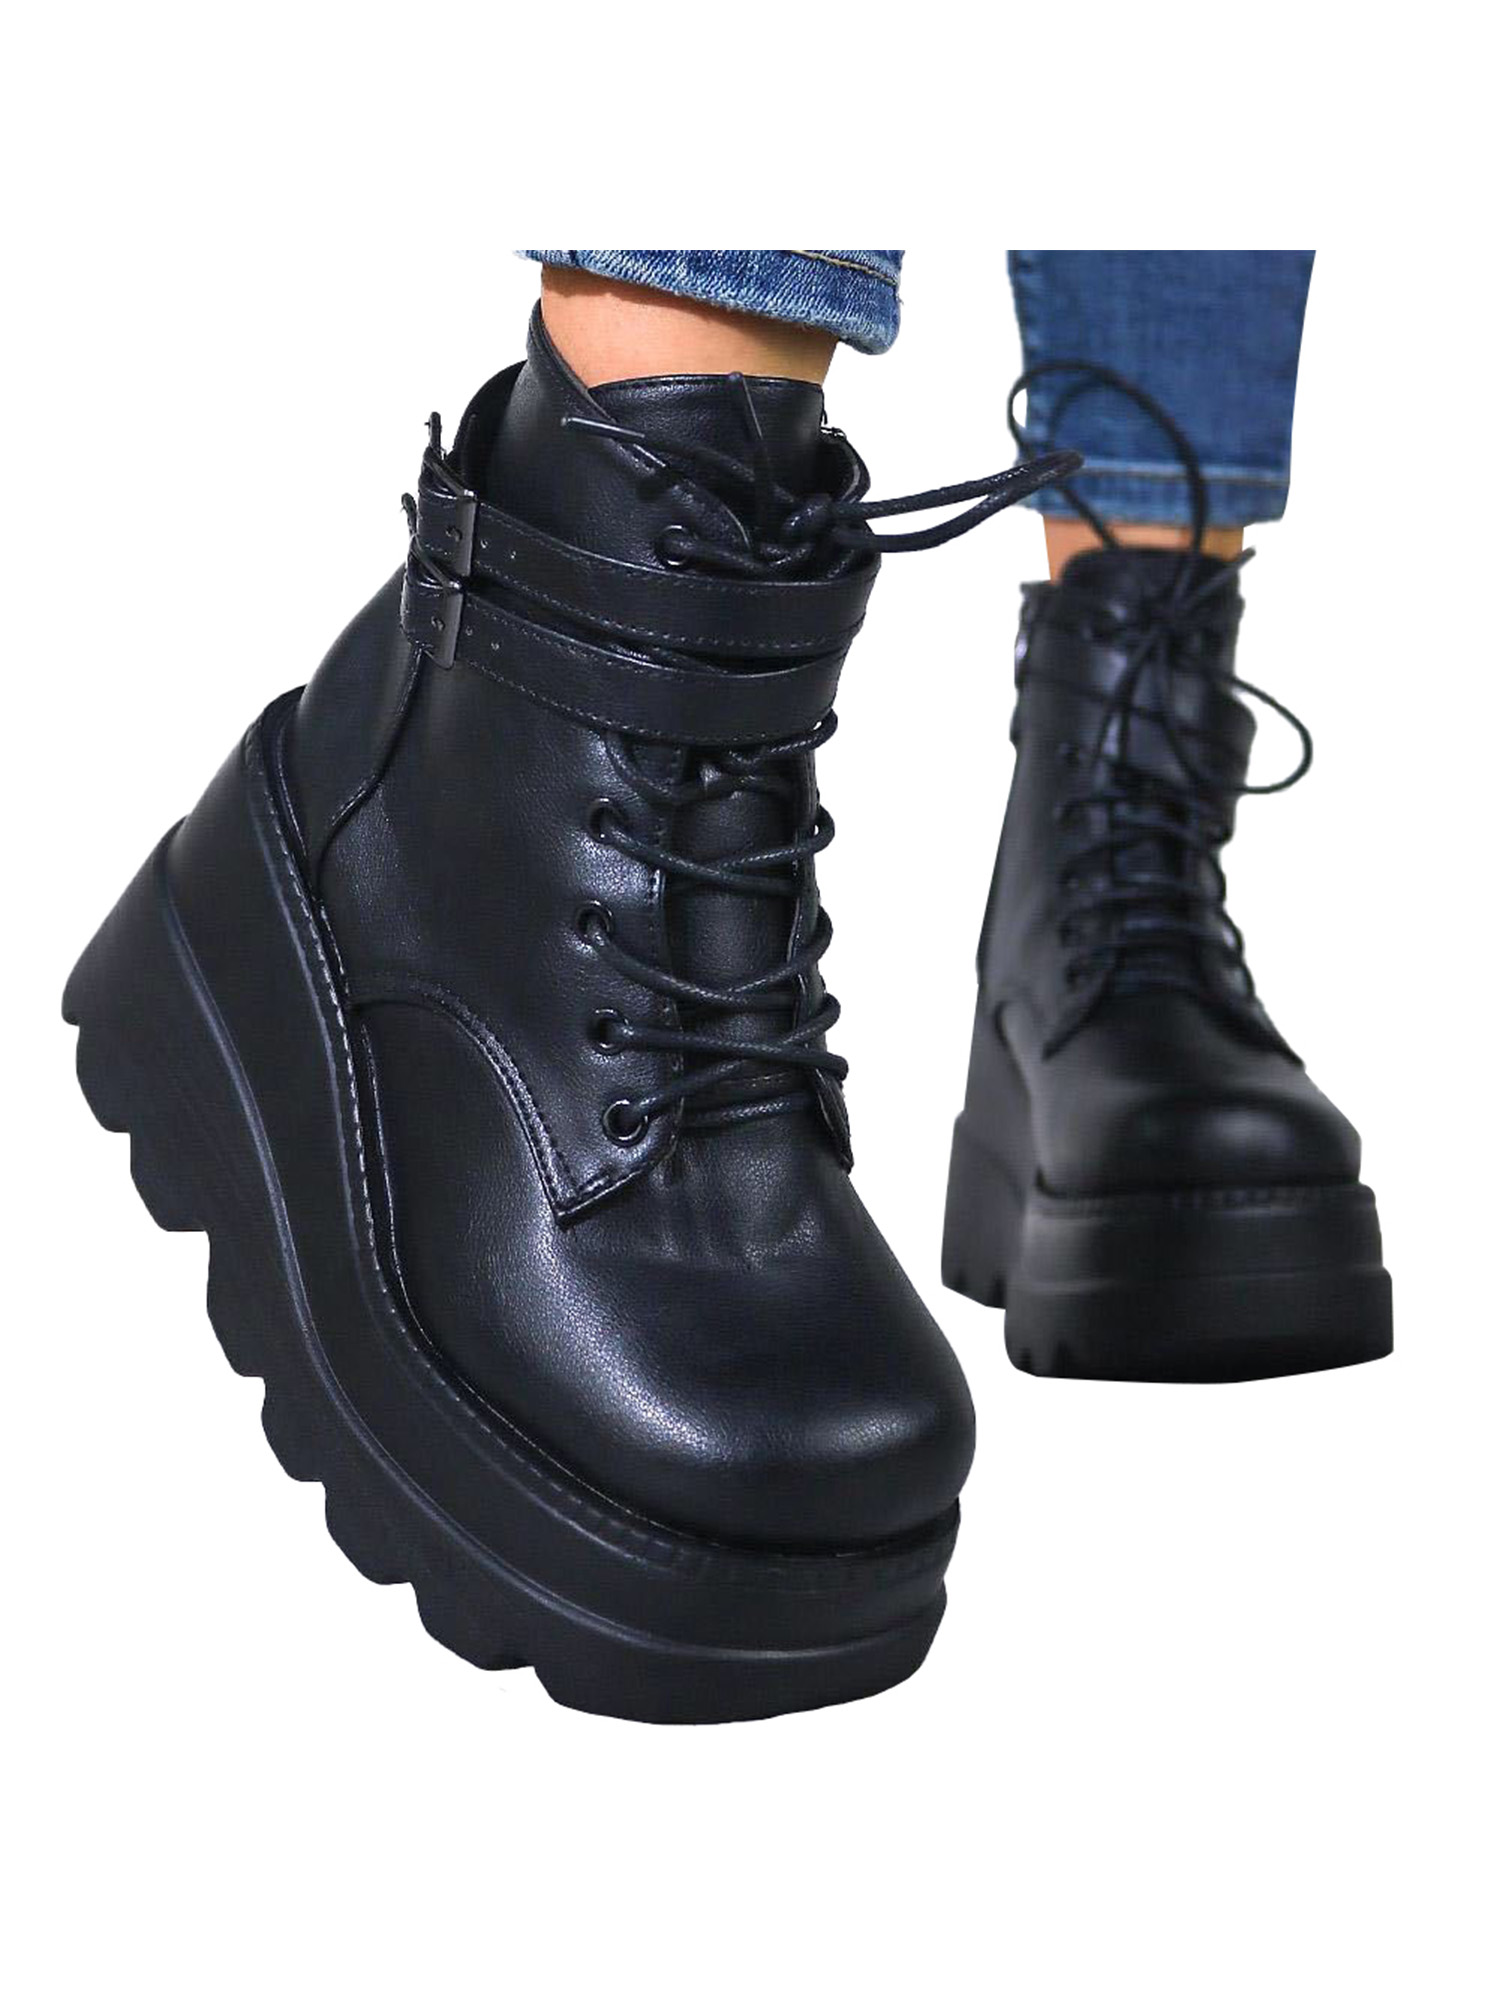 Wazshop Womens Shoes Platform Shoes Ankle Boots High Heel Shoes Round Toe Casual Shoes - image 3 of 4